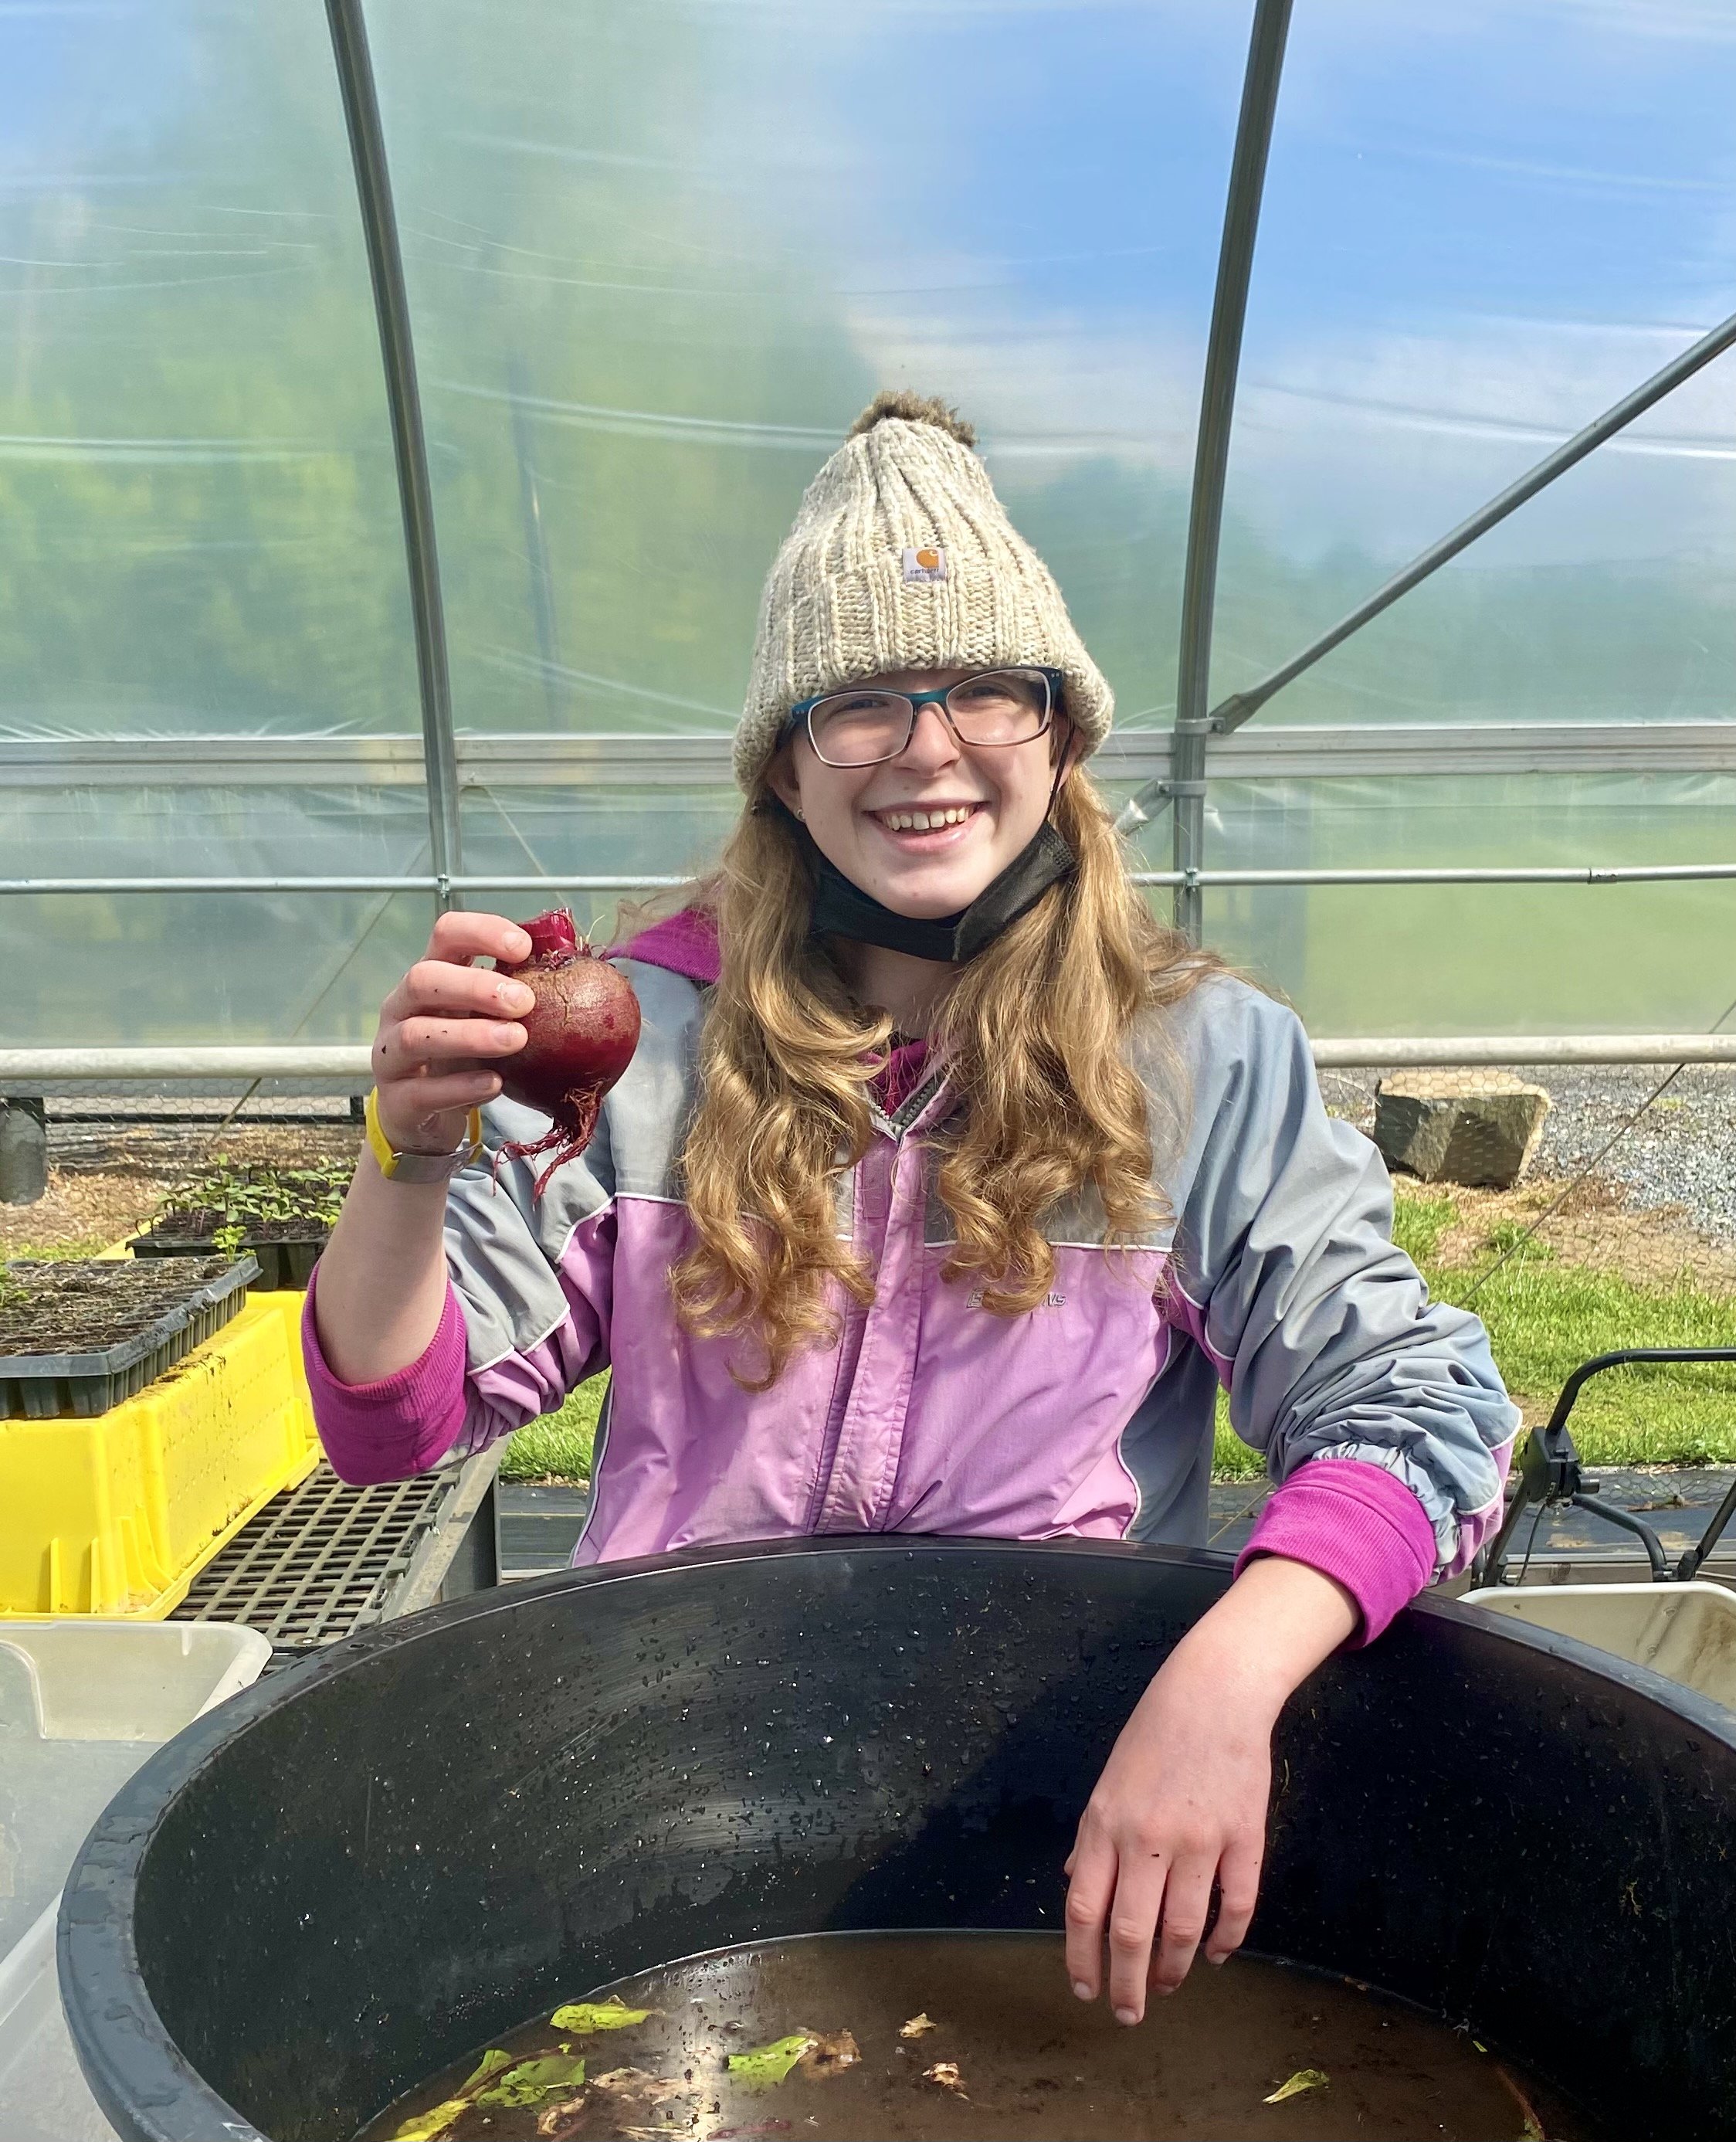 Grower Emma washing beets in the greenhouse.jpg